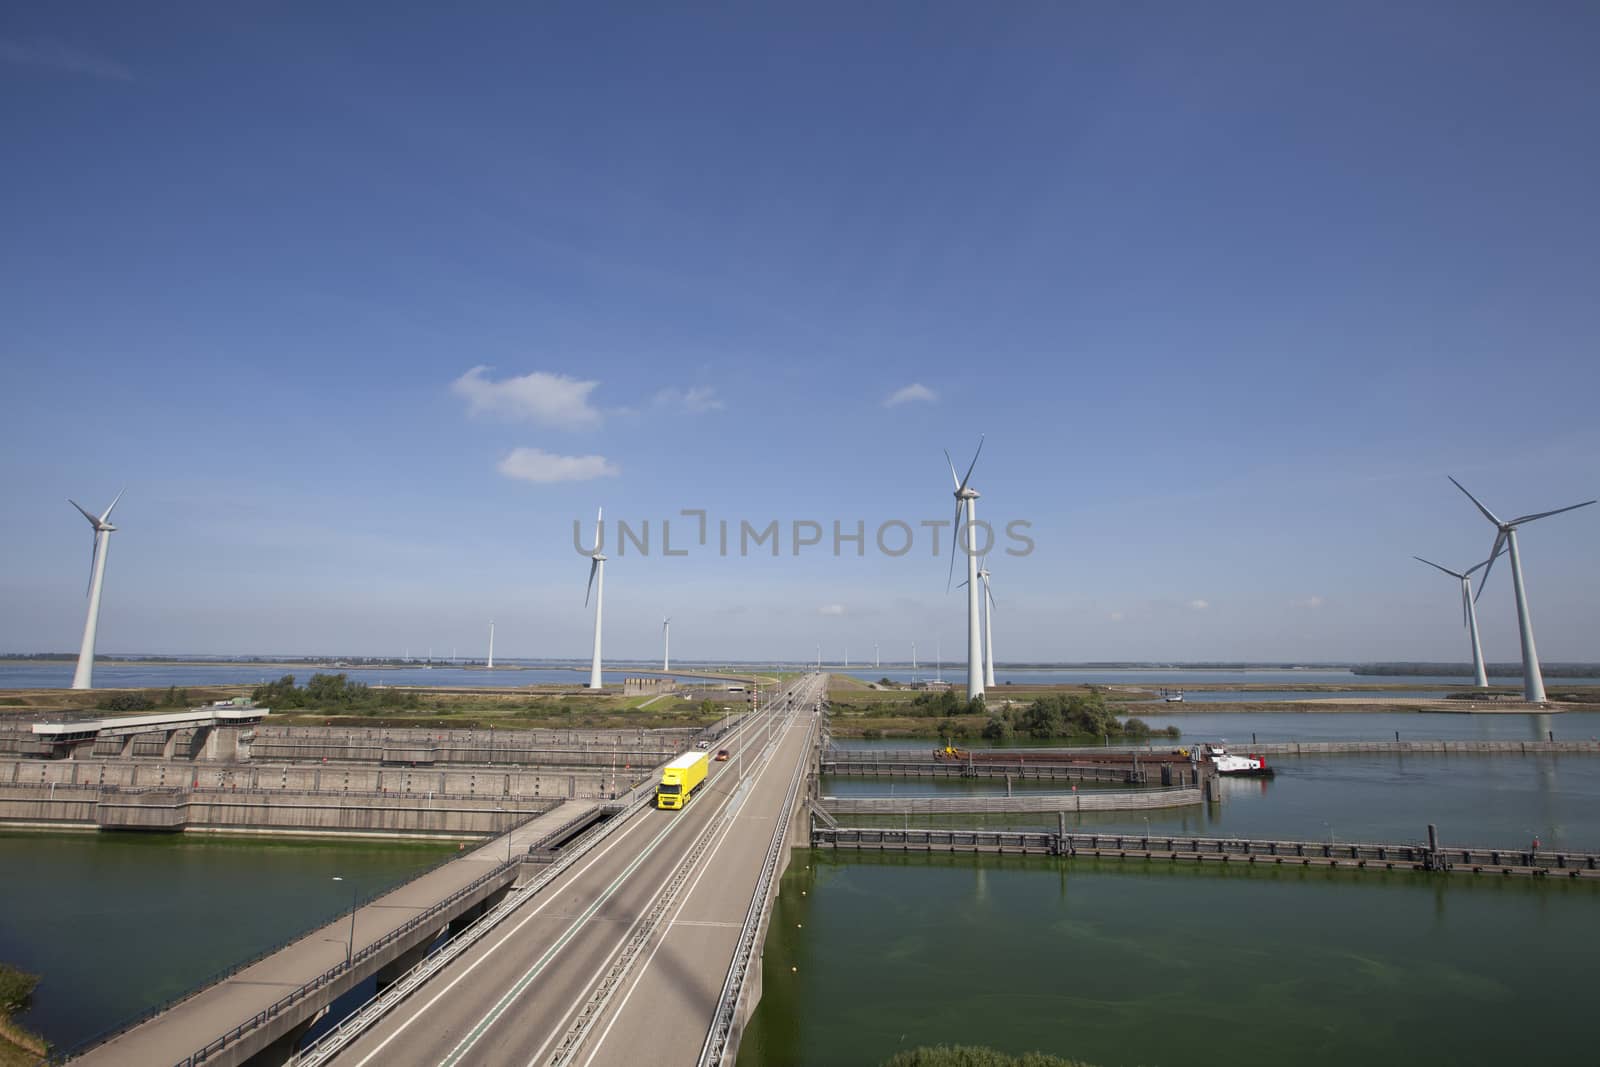 Volkeraksluizen lake krammer. Drone photograpy from the delta works in noord brabant in the Netherlands